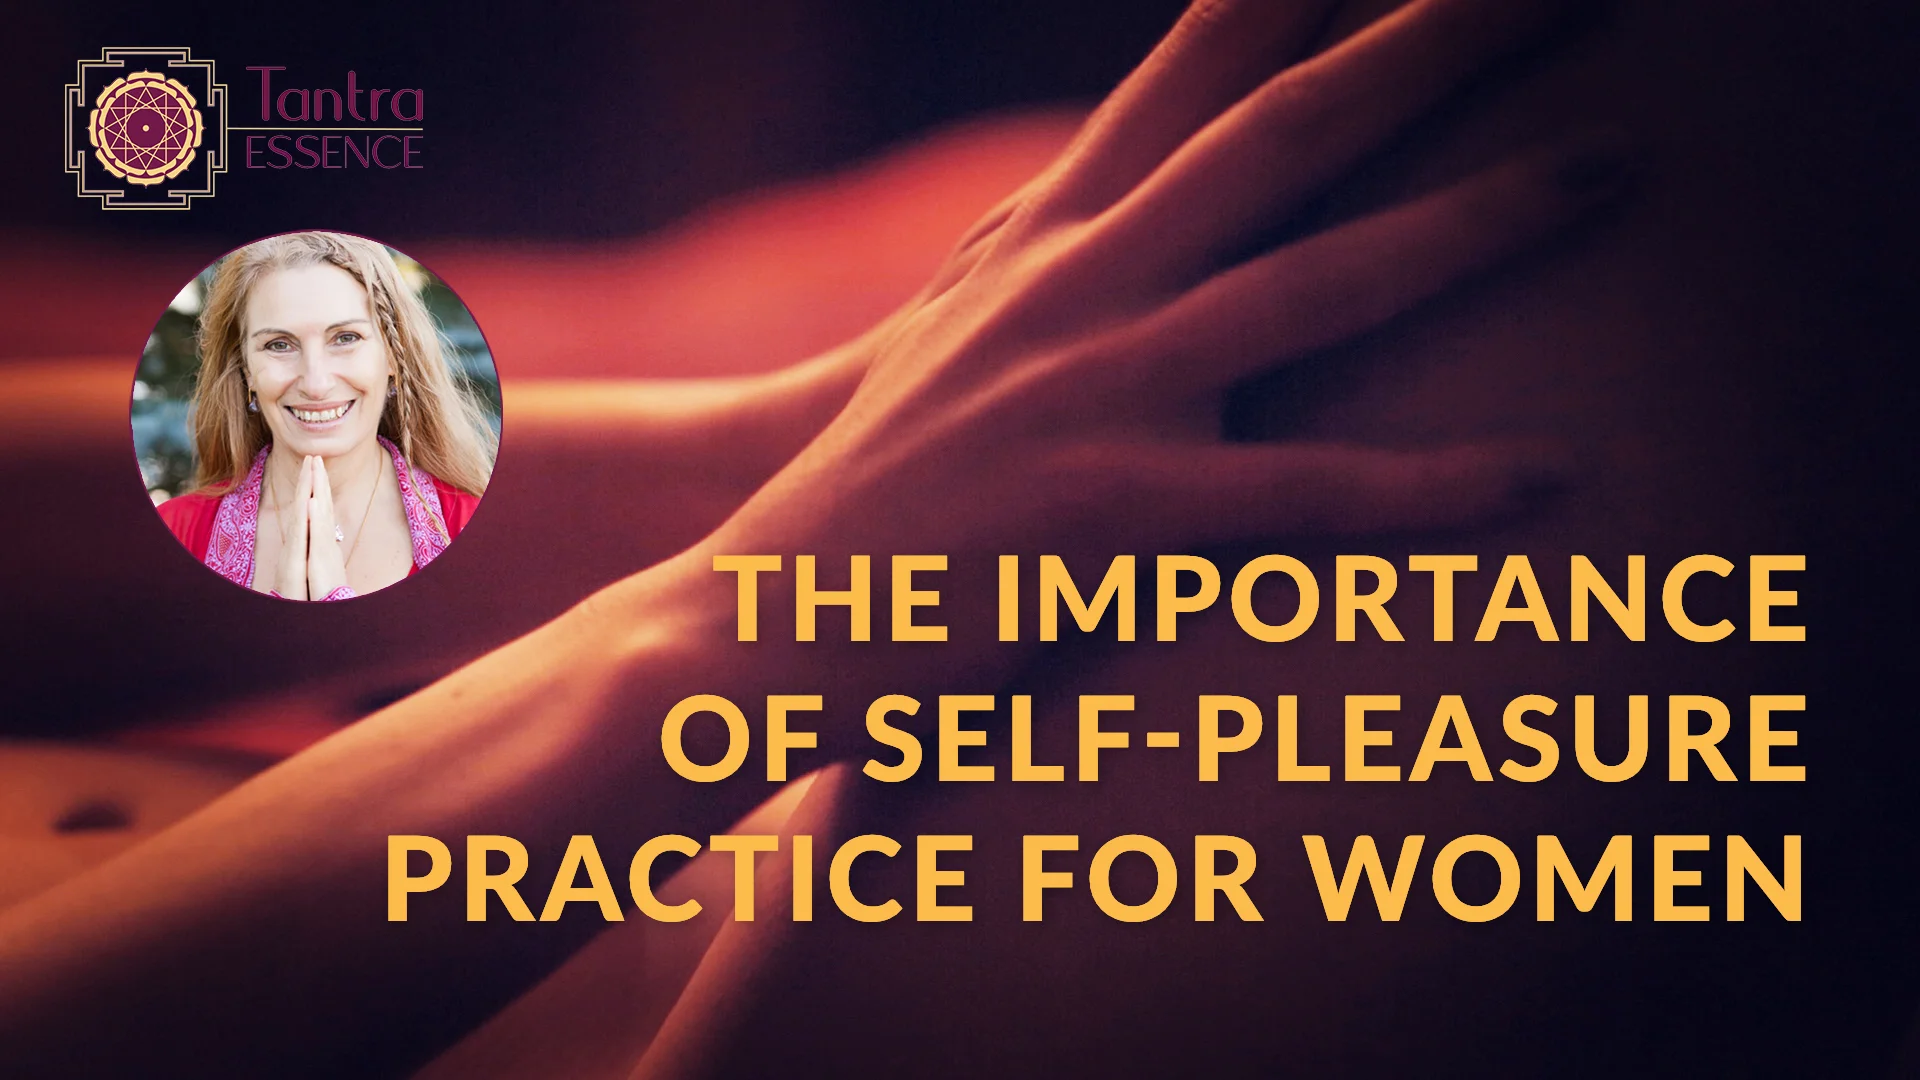 The importance of self-pleasure practice for women on Vimeo